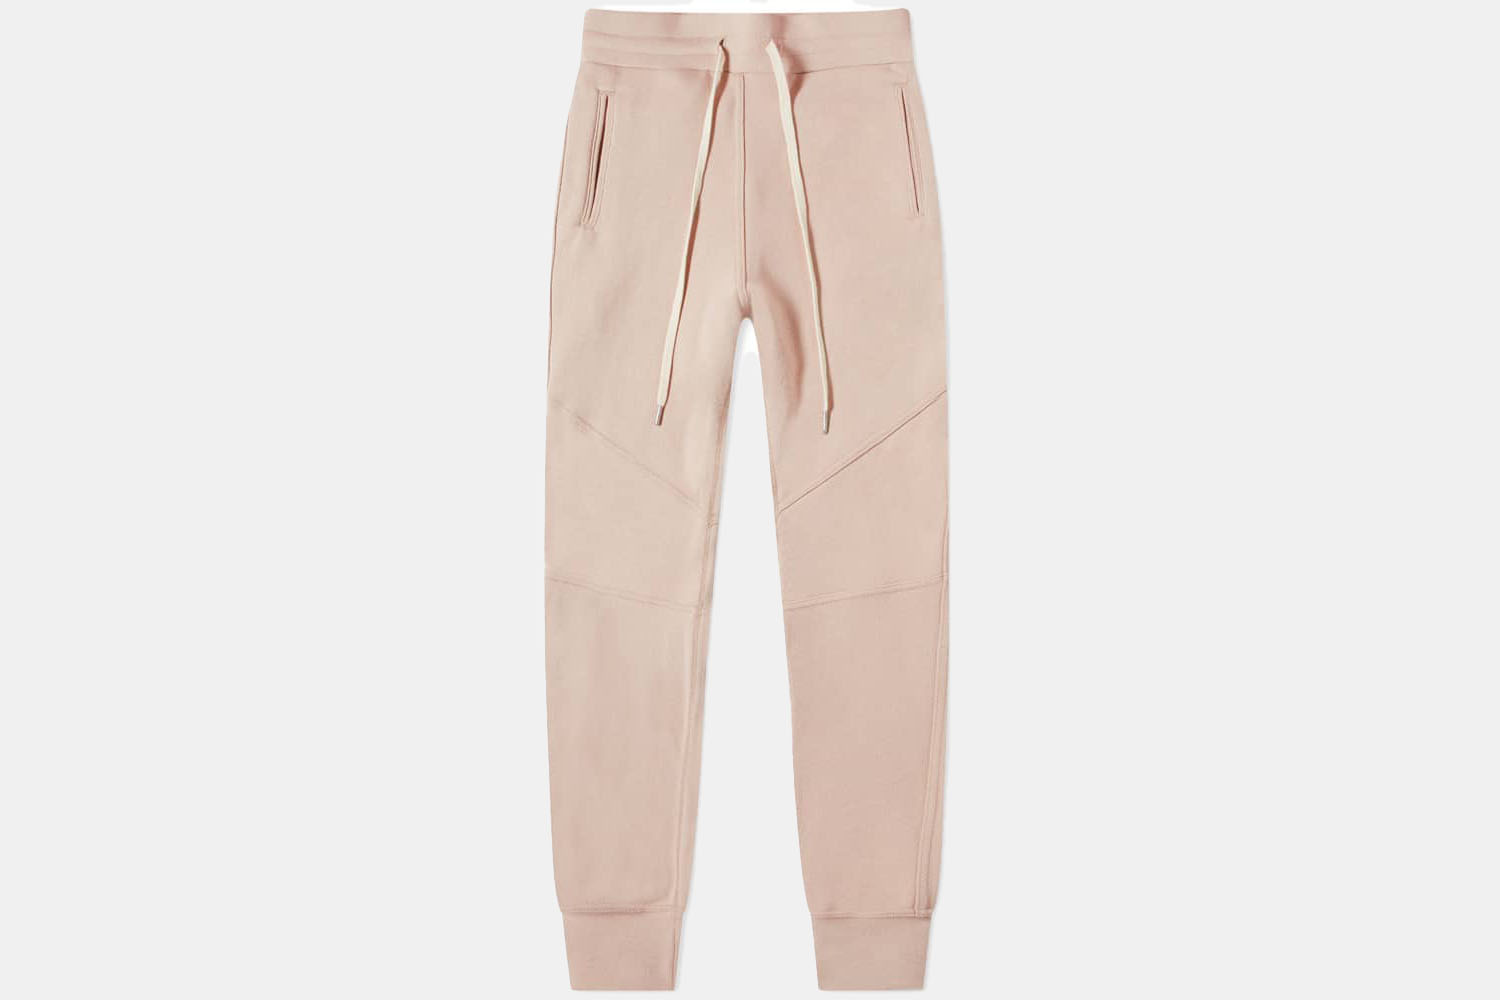 a pair of pink sweatpants 